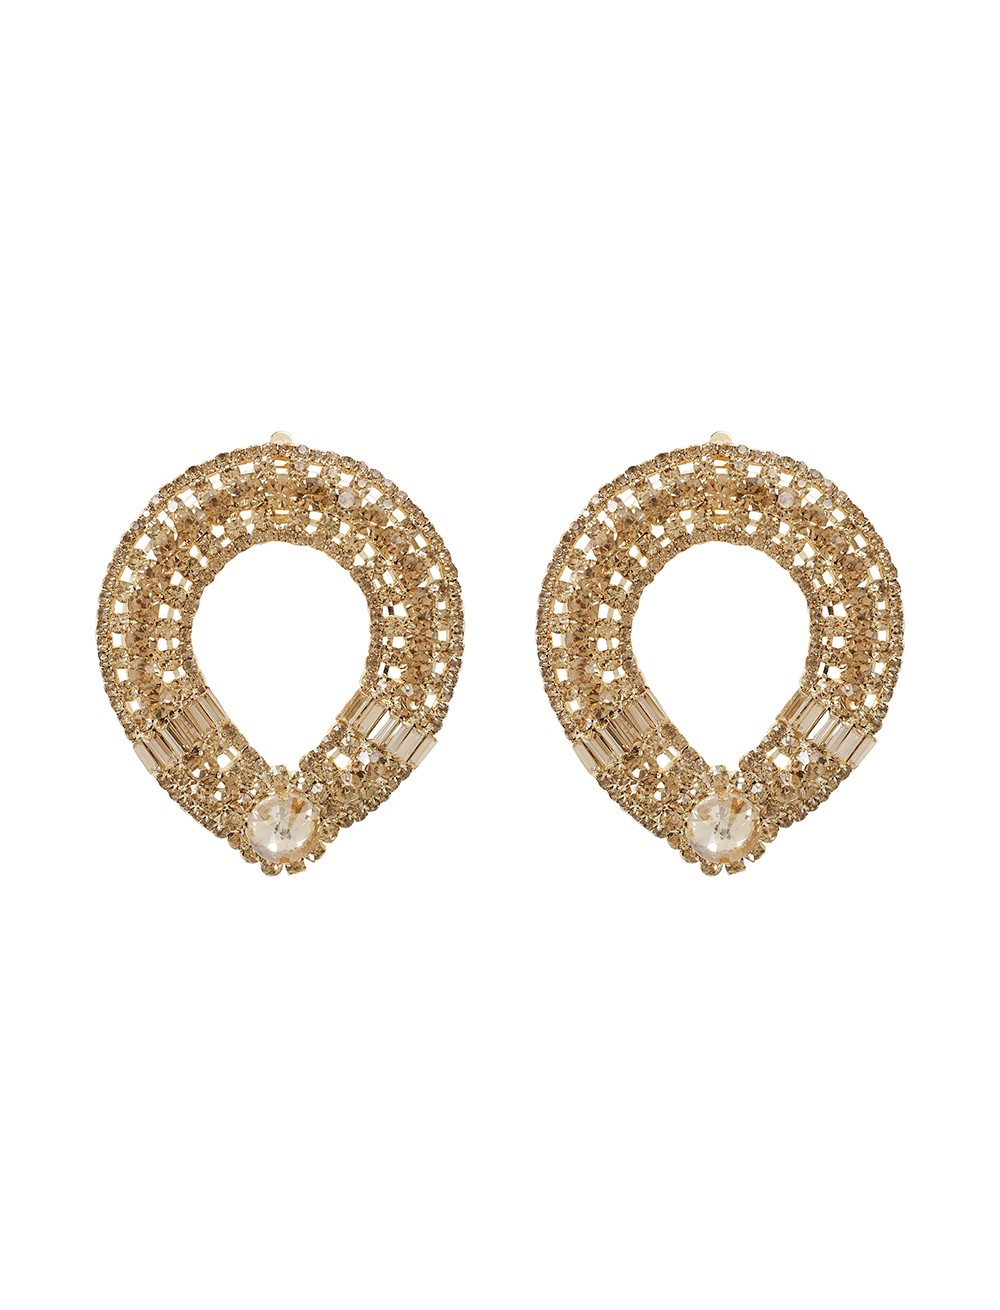 Gold Oval Earrings With Gold Crystals